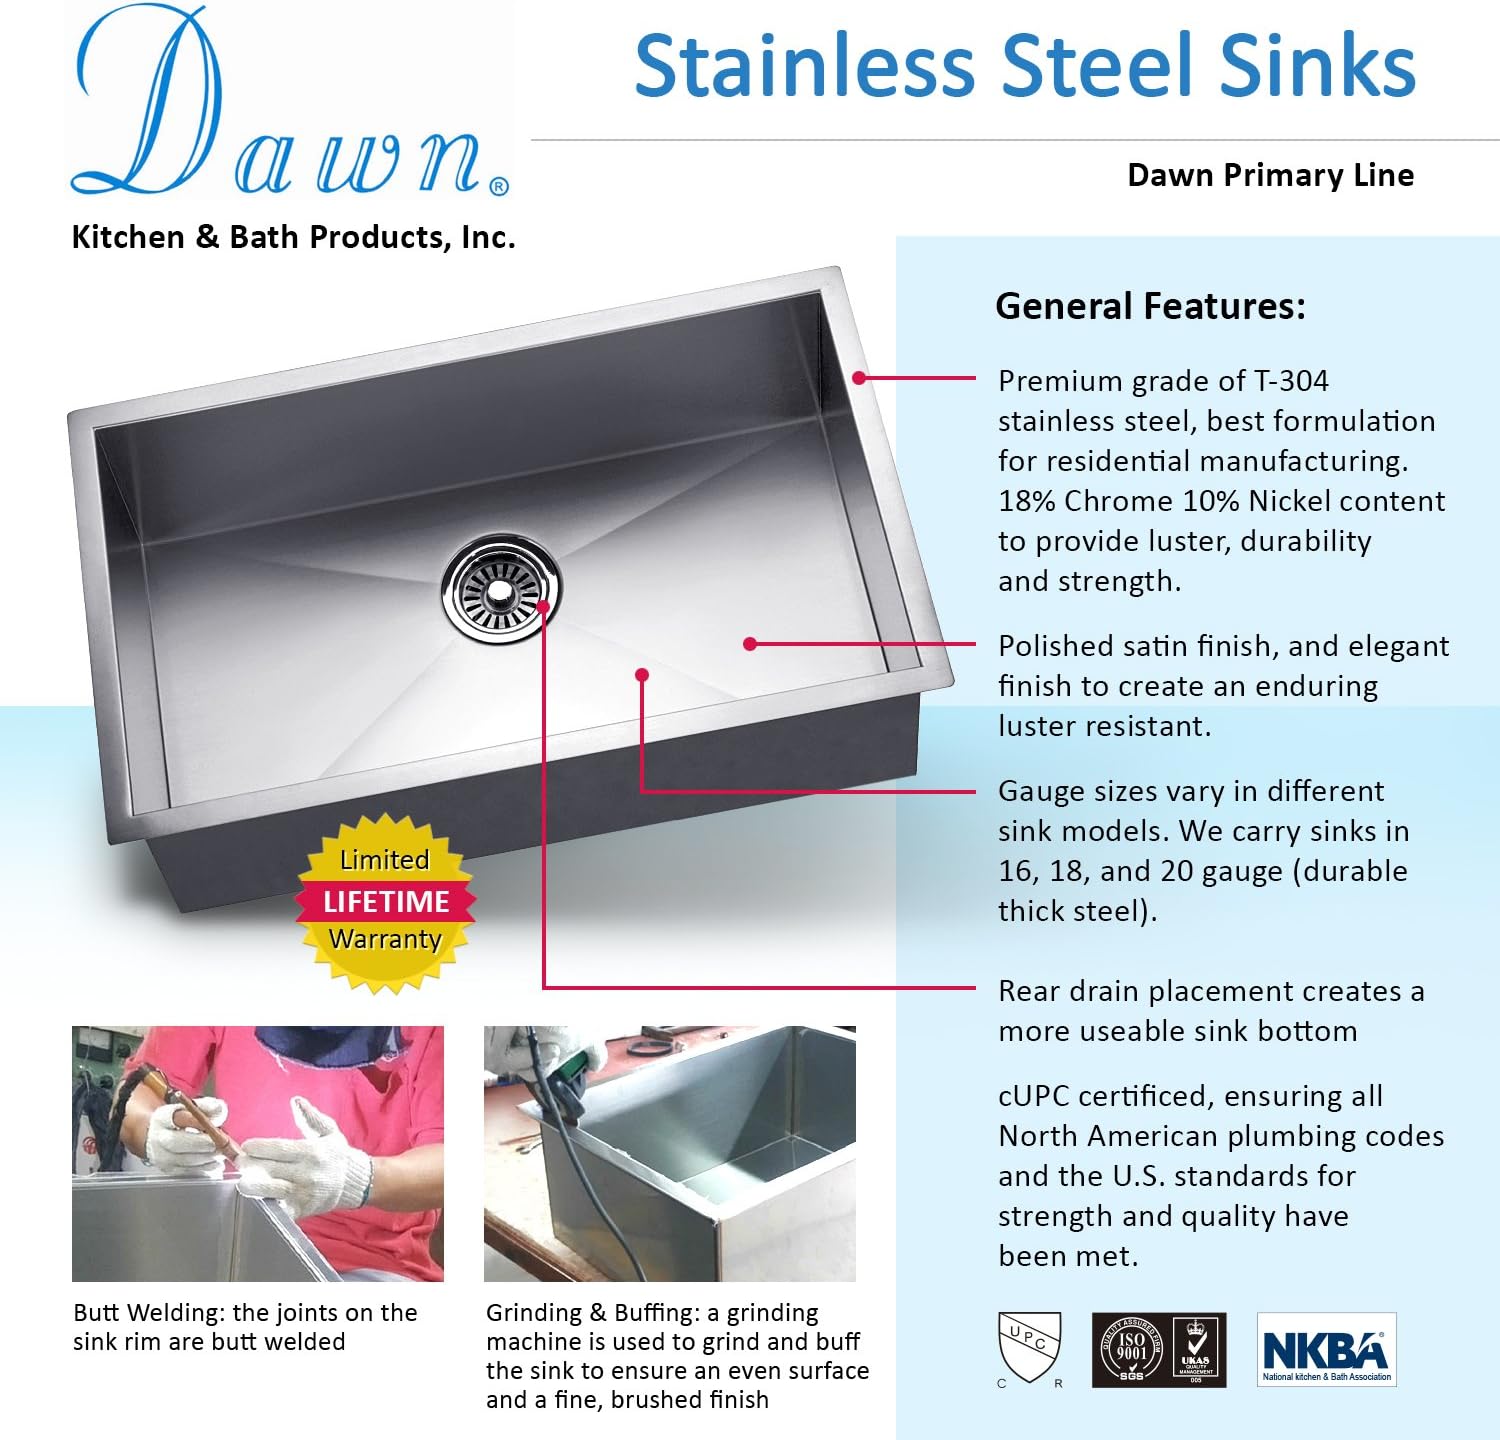 Dawn Kitchen & Bath Products features of their stainless steel sinks